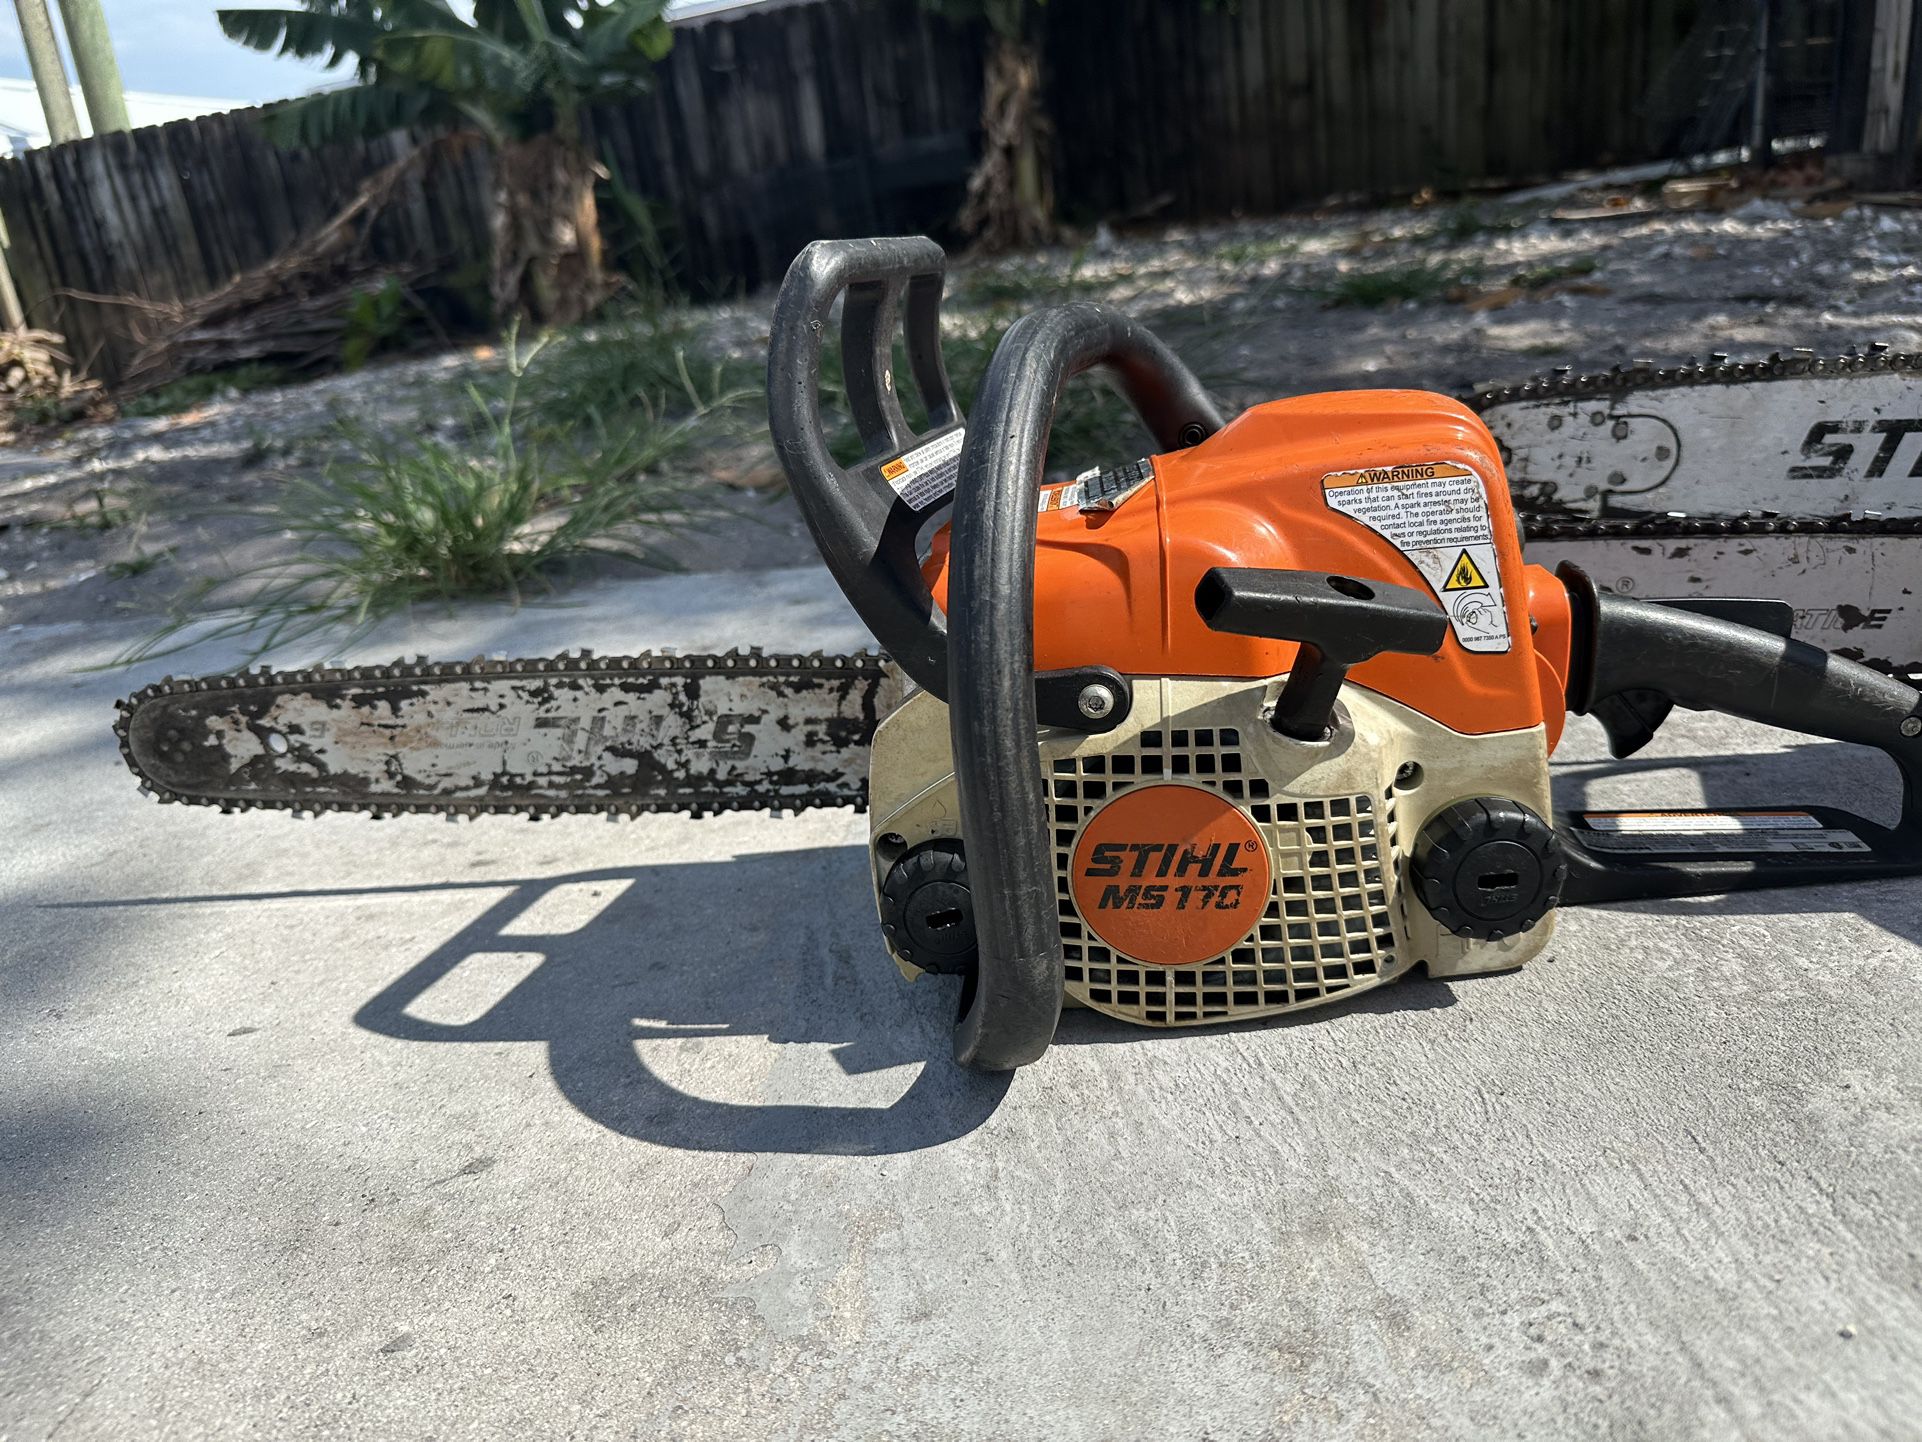 Sthil Chainsaw Ms170